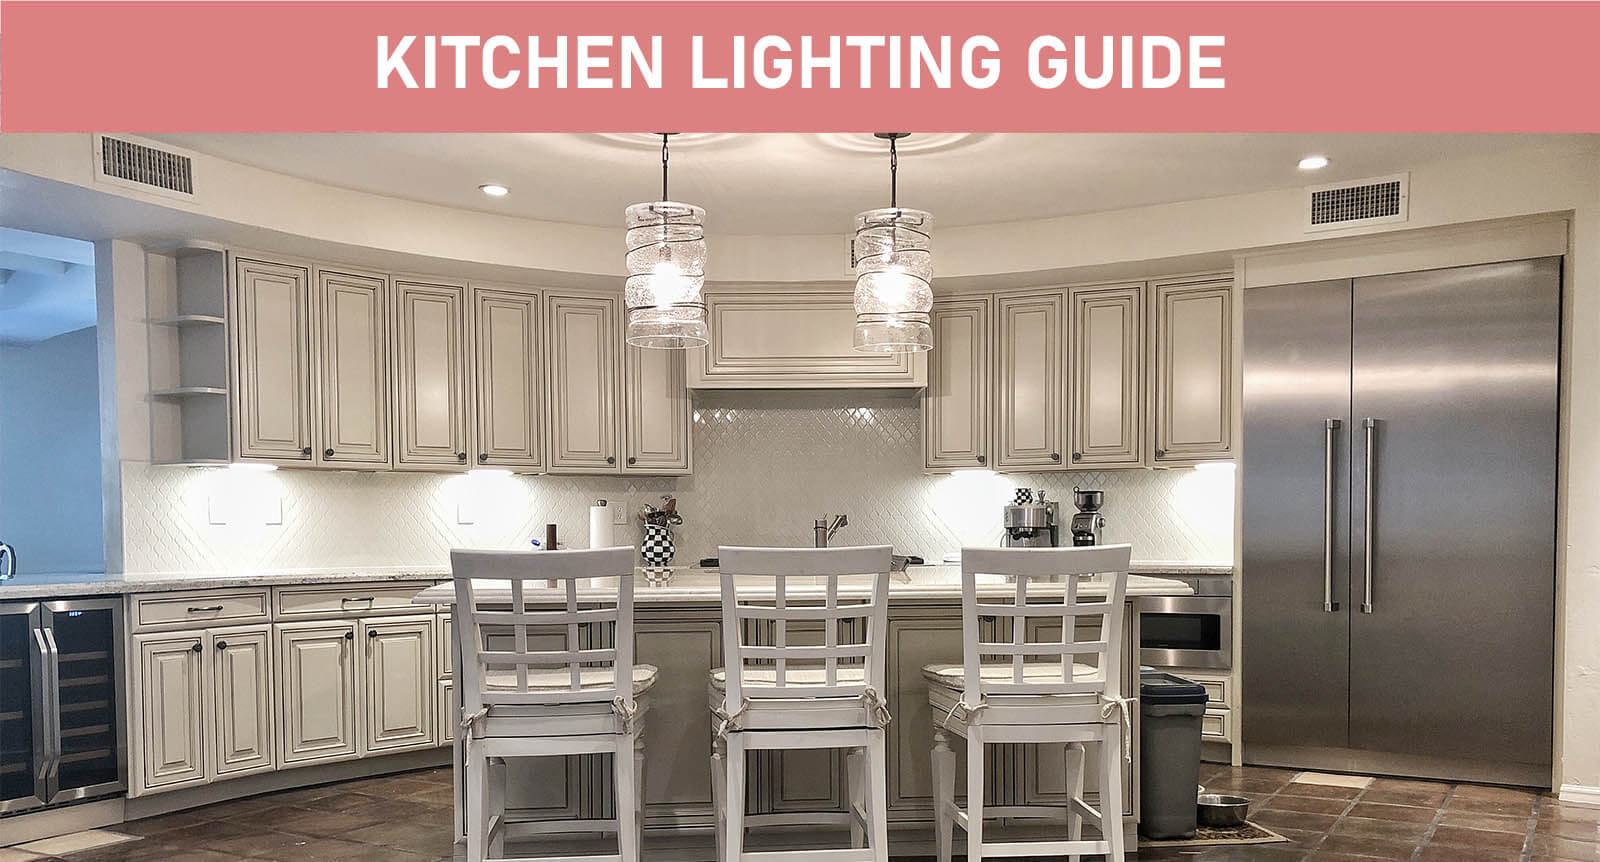 Kitchen Lighting (Complete Guide) Featured image